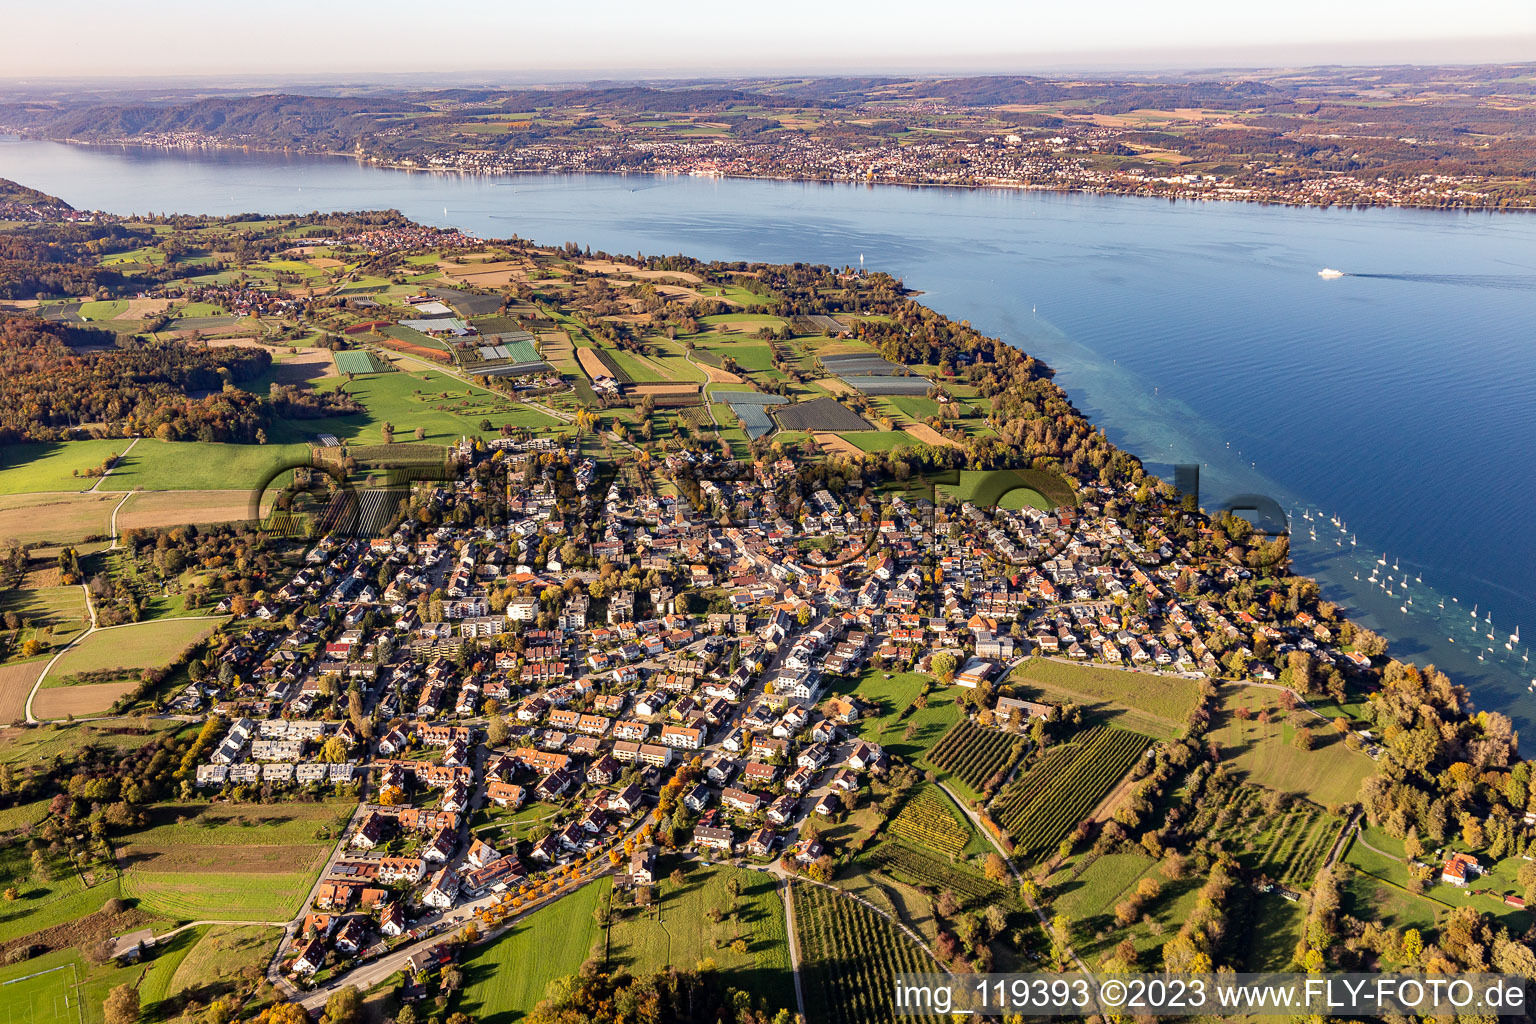 Aerial view of Pleasure boat marina on the shore area of Lake of Constance in the district Litzelstetten in Konstanz in the state Baden-Wurttemberg, Germany